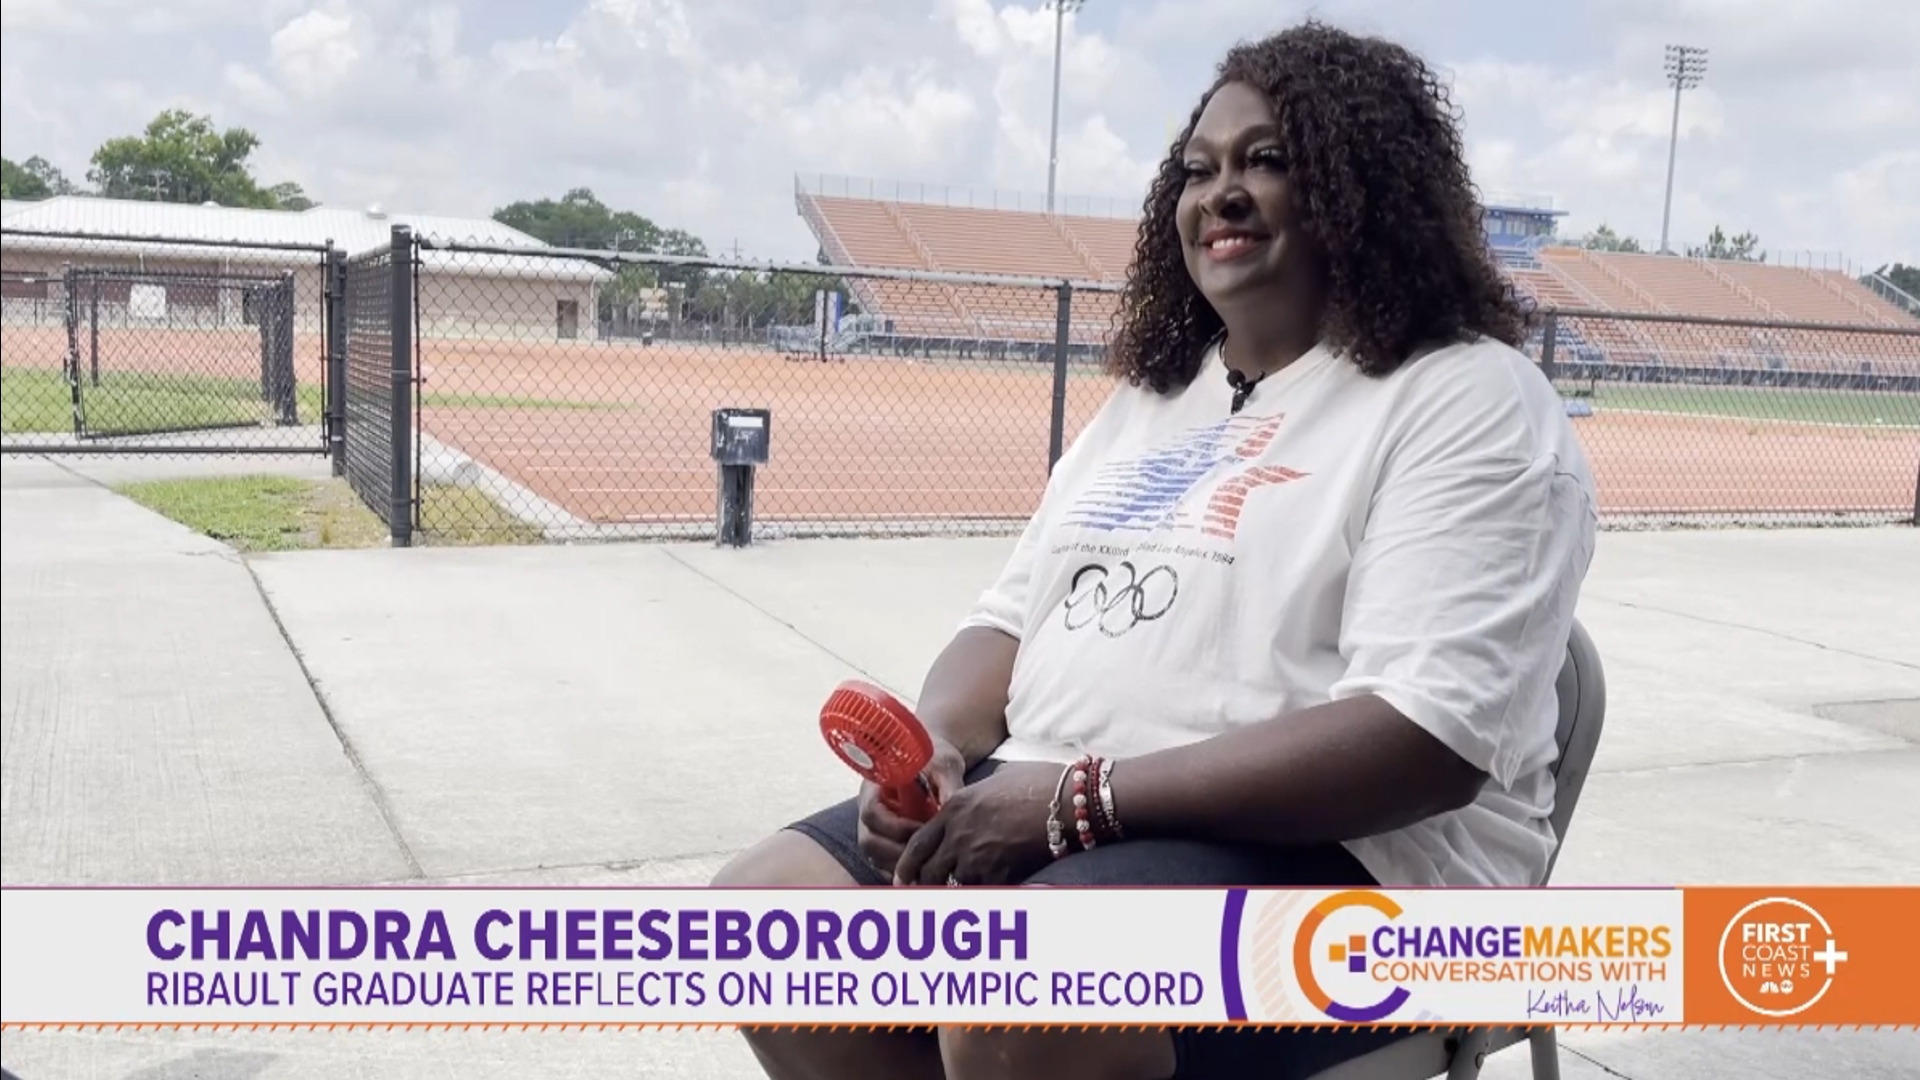 Olympic gold medalist and Jean Ribault High School graduate Chandra Cheeseborough reflects on her time as an Olympian and her unbroken 20-year Olympic trial record.